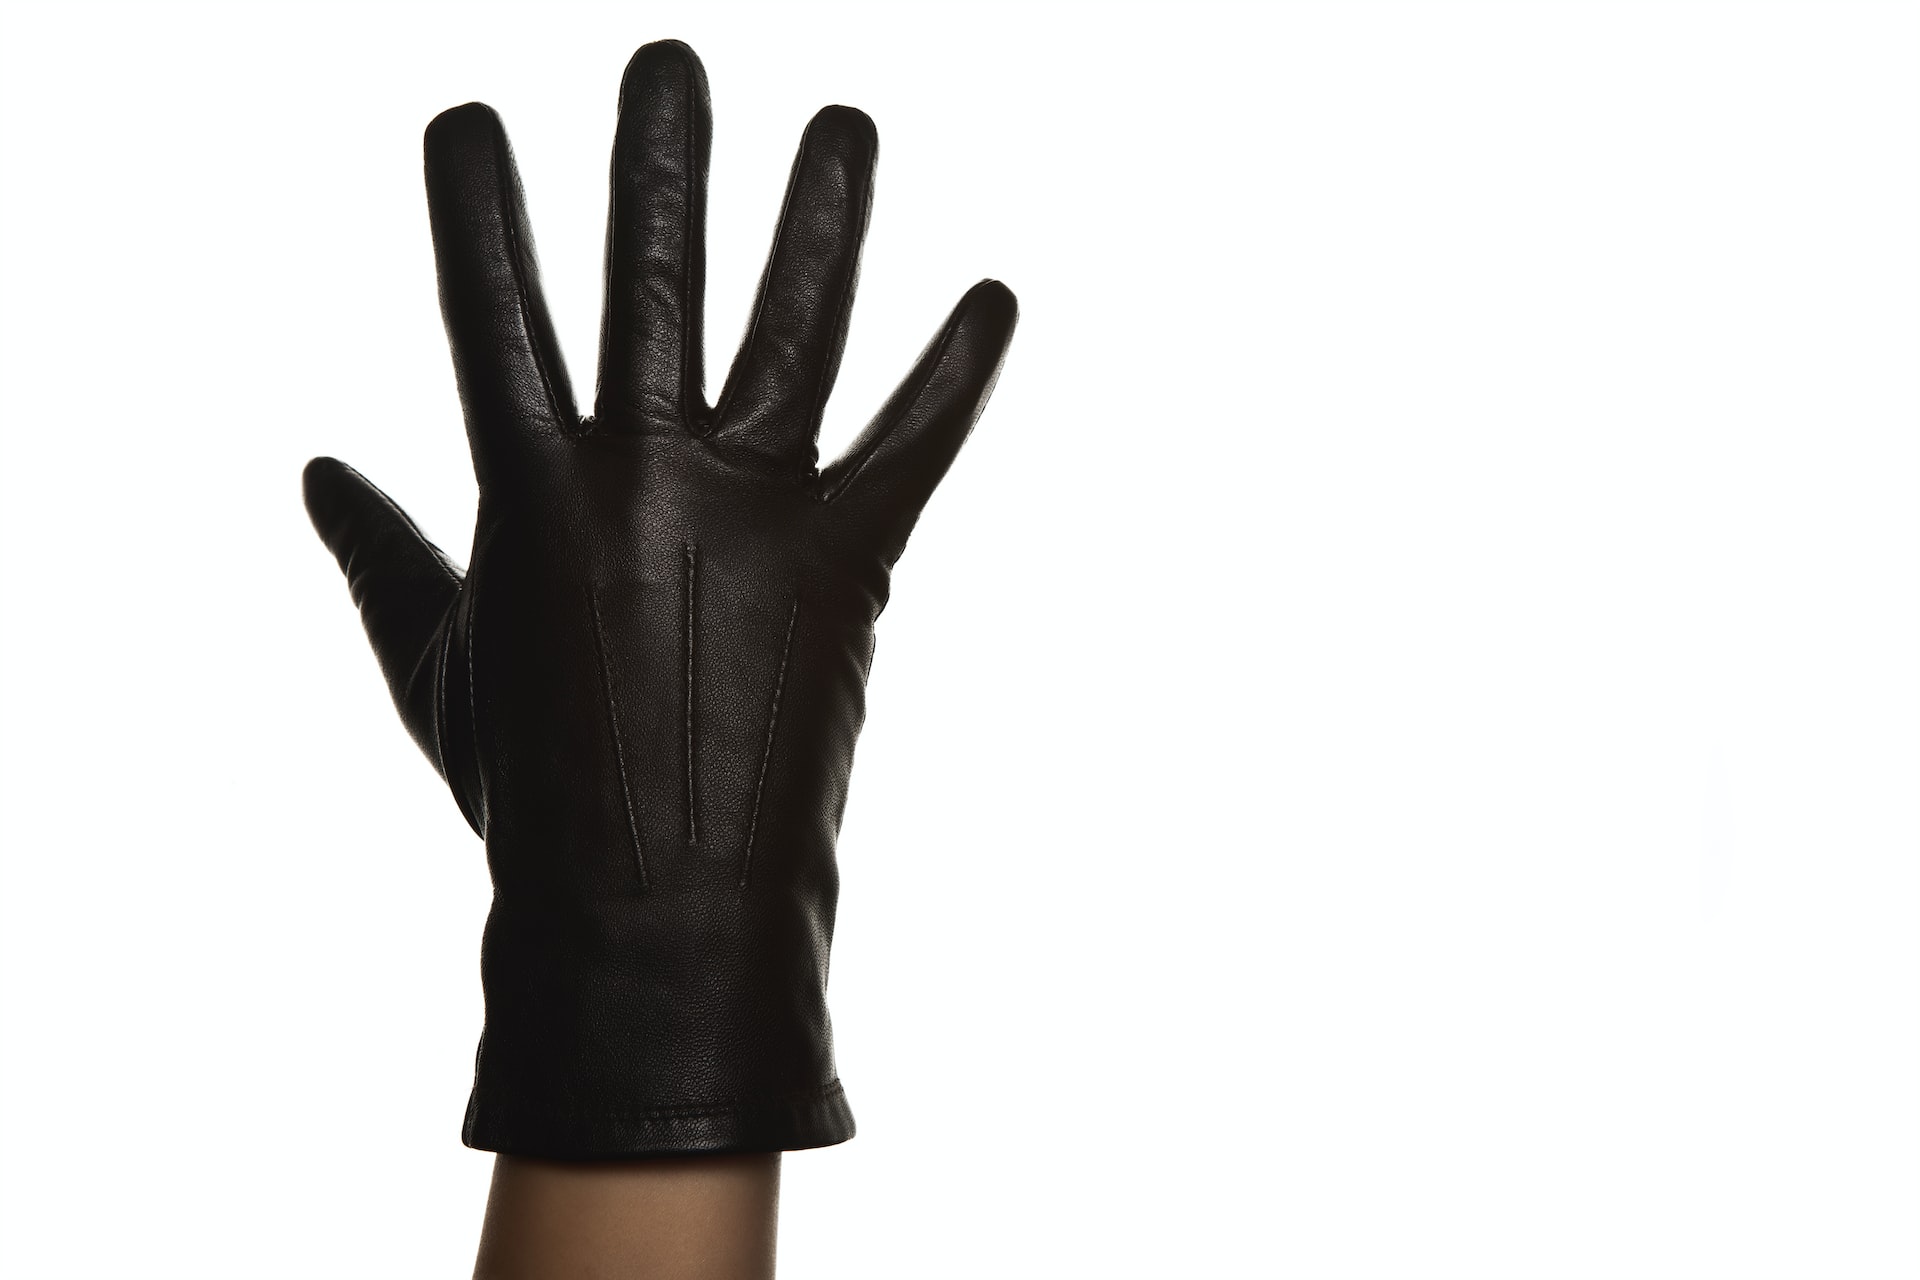 Checkout Those Things That You Have To Consider For Buying Insulated Leather Work Gloves.